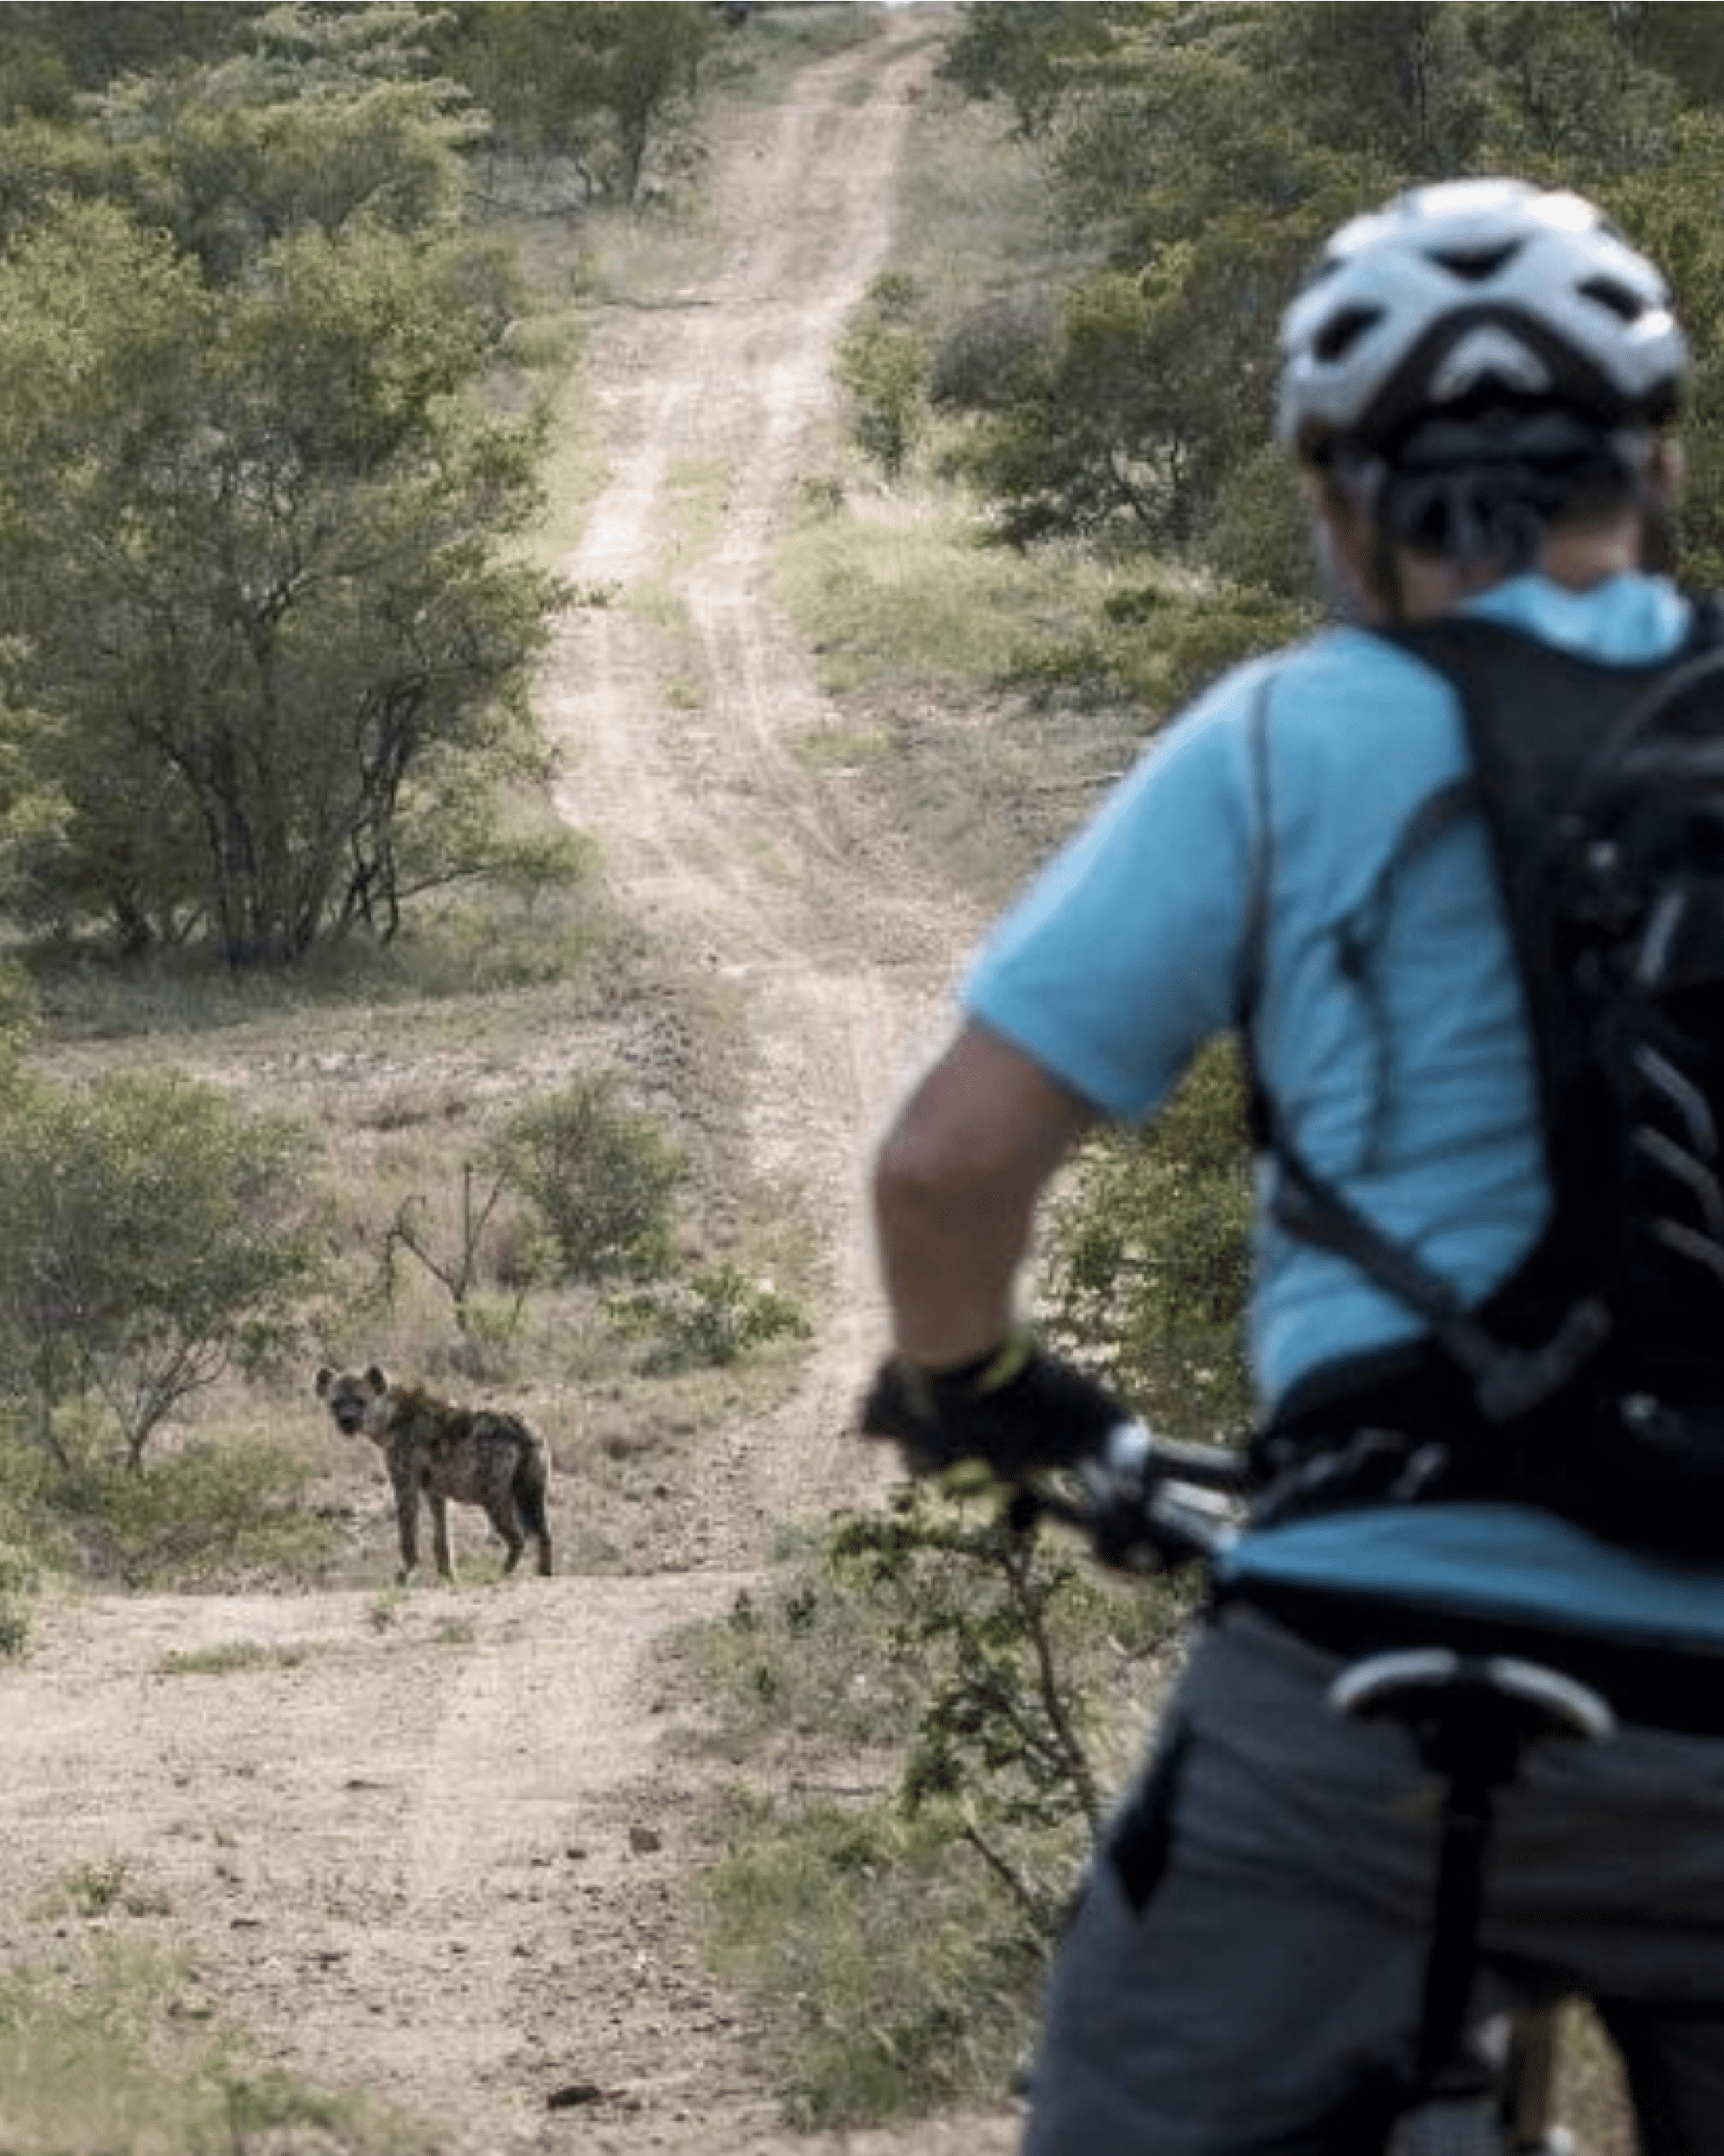 Mountain Biking Safaris Explore some of Africa’s most celebrated wilderness areas and cycle in search of the Big Five and other prolific wildlife on expertly guided mountain biking safaris.
More Info